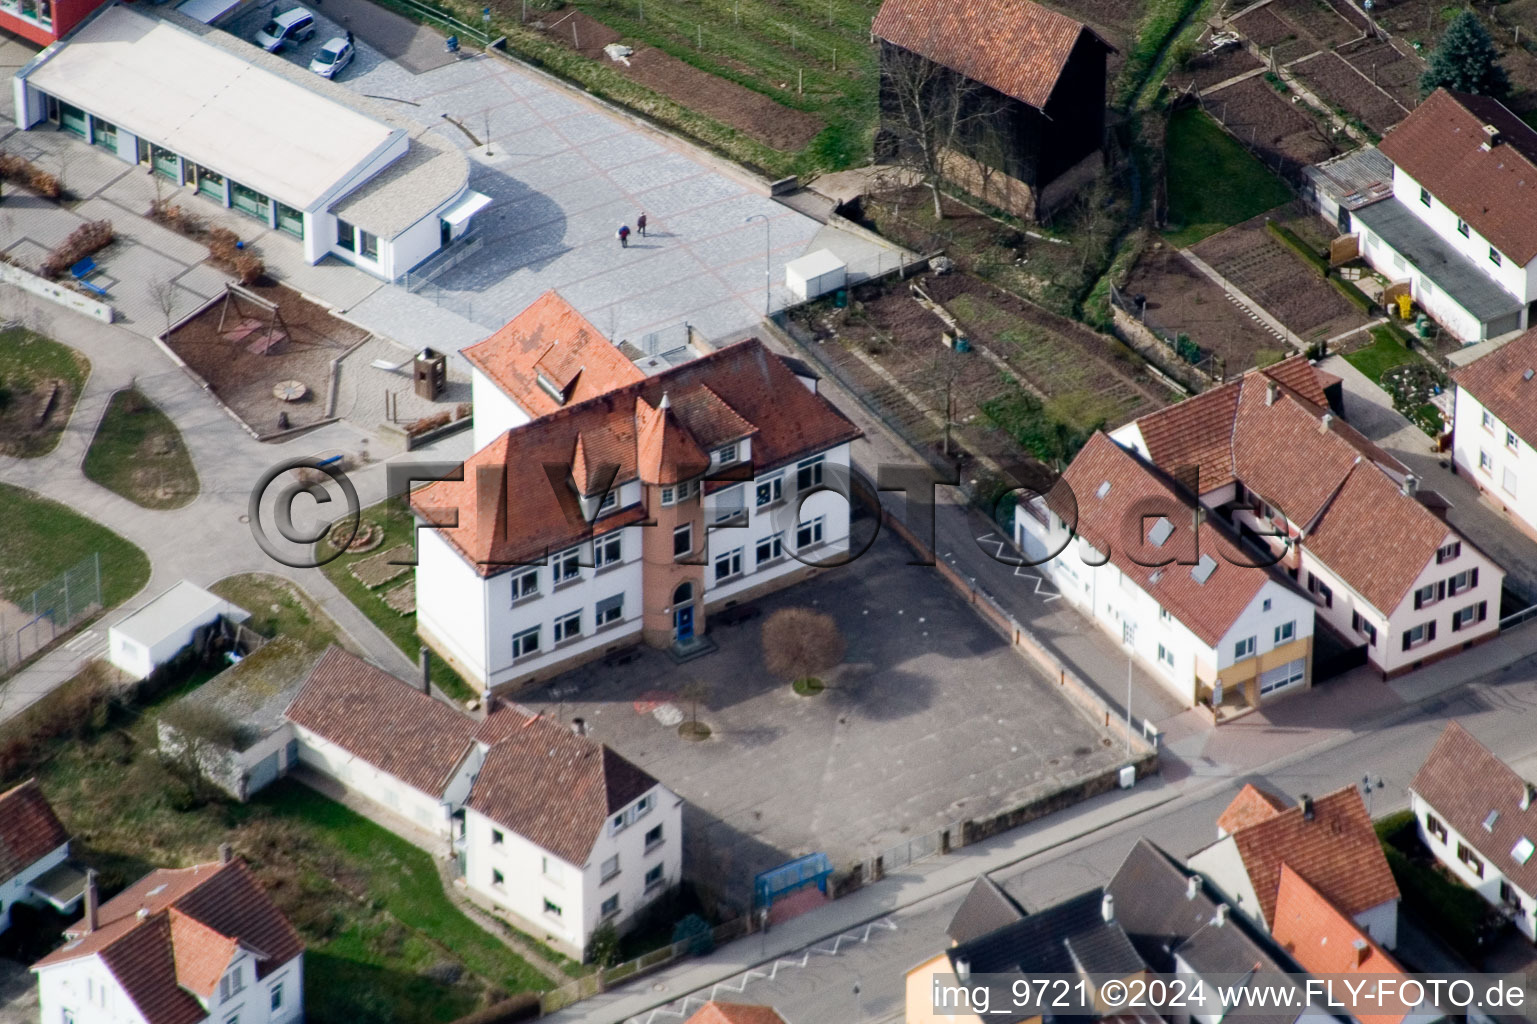 Primary school in Offenbach an der Queich in the state Rhineland-Palatinate, Germany